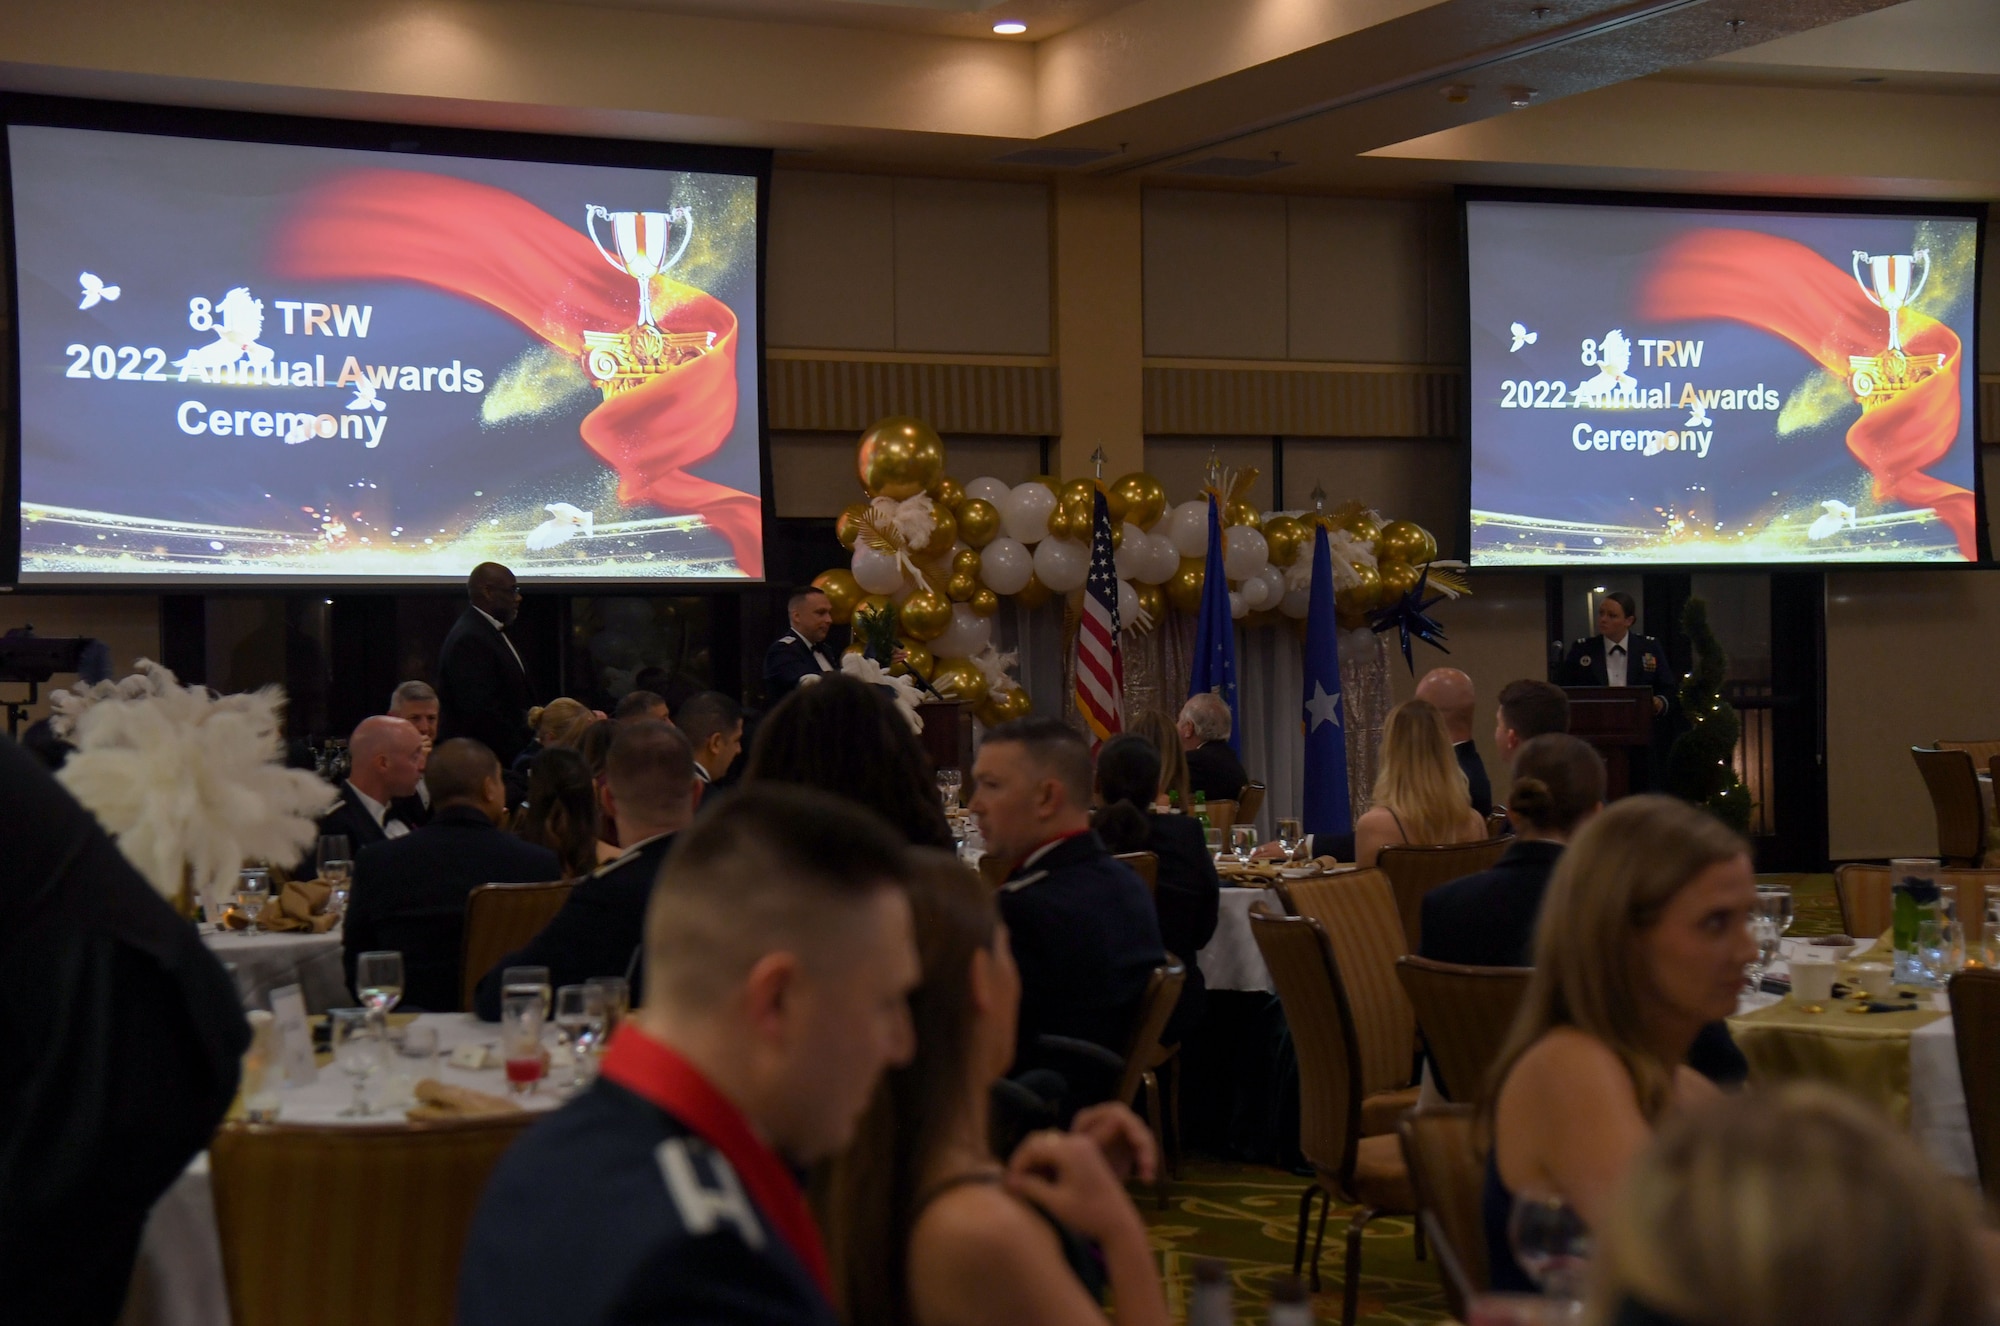 U.S. Air Force Brig. Gen. Lyle Drew, 82nd Training Wing commander, delivers remarks during the 81st Training Wing's 2022 Annual Awards Ceremony inside the Bay Breeze Event Center at Keesler Air Force Base, Mississippi, Feb. 24, 2023.